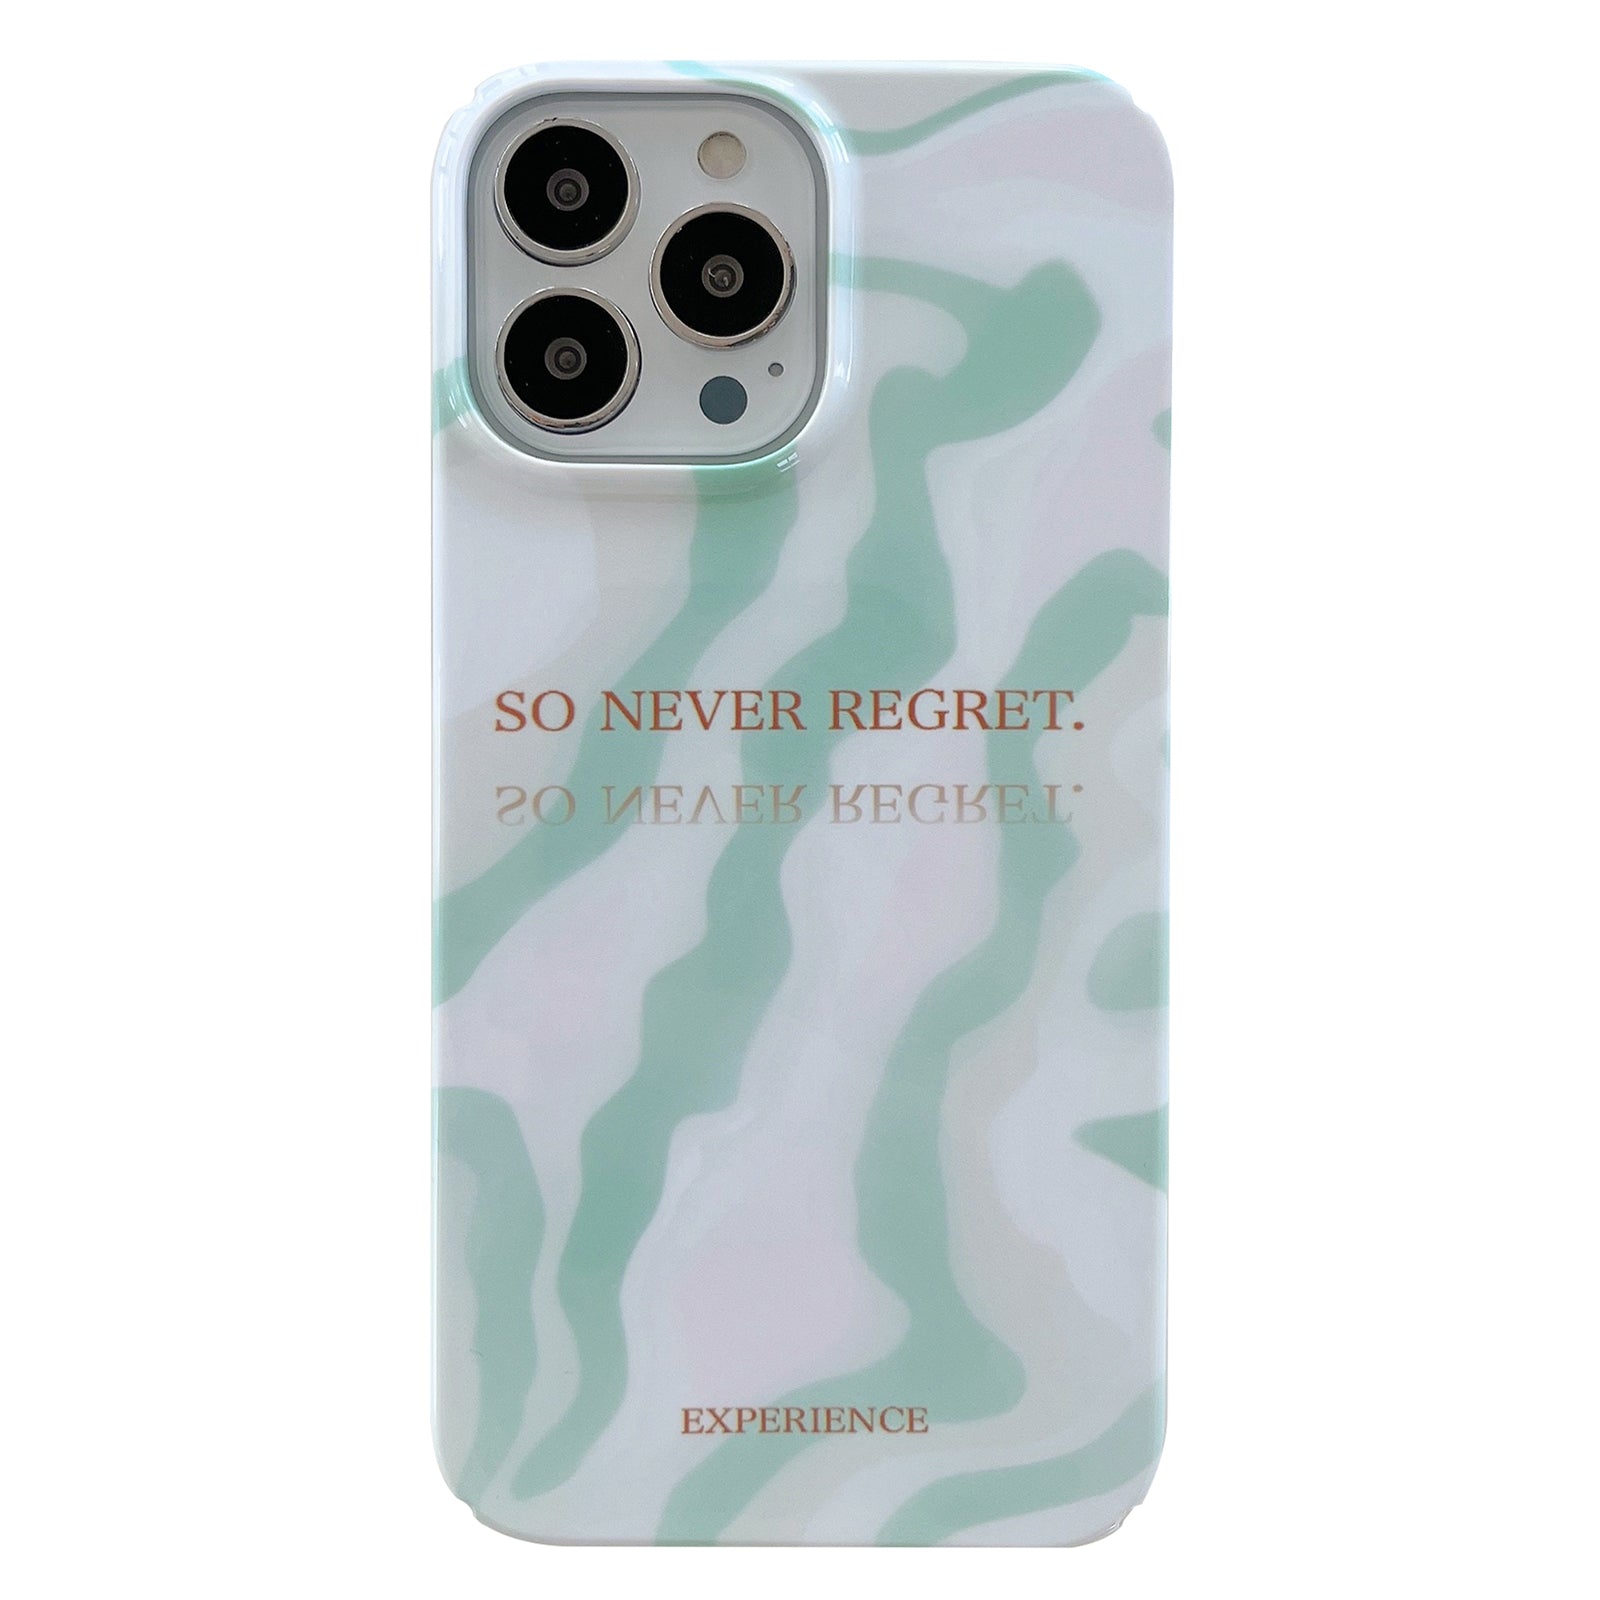 Uniqkart for iPhone 12 Pro Max 6.7 inch Hard PC Phone Case Pattern Printing Protective Glossy Phone Shell - Matcha Green Water Ripple